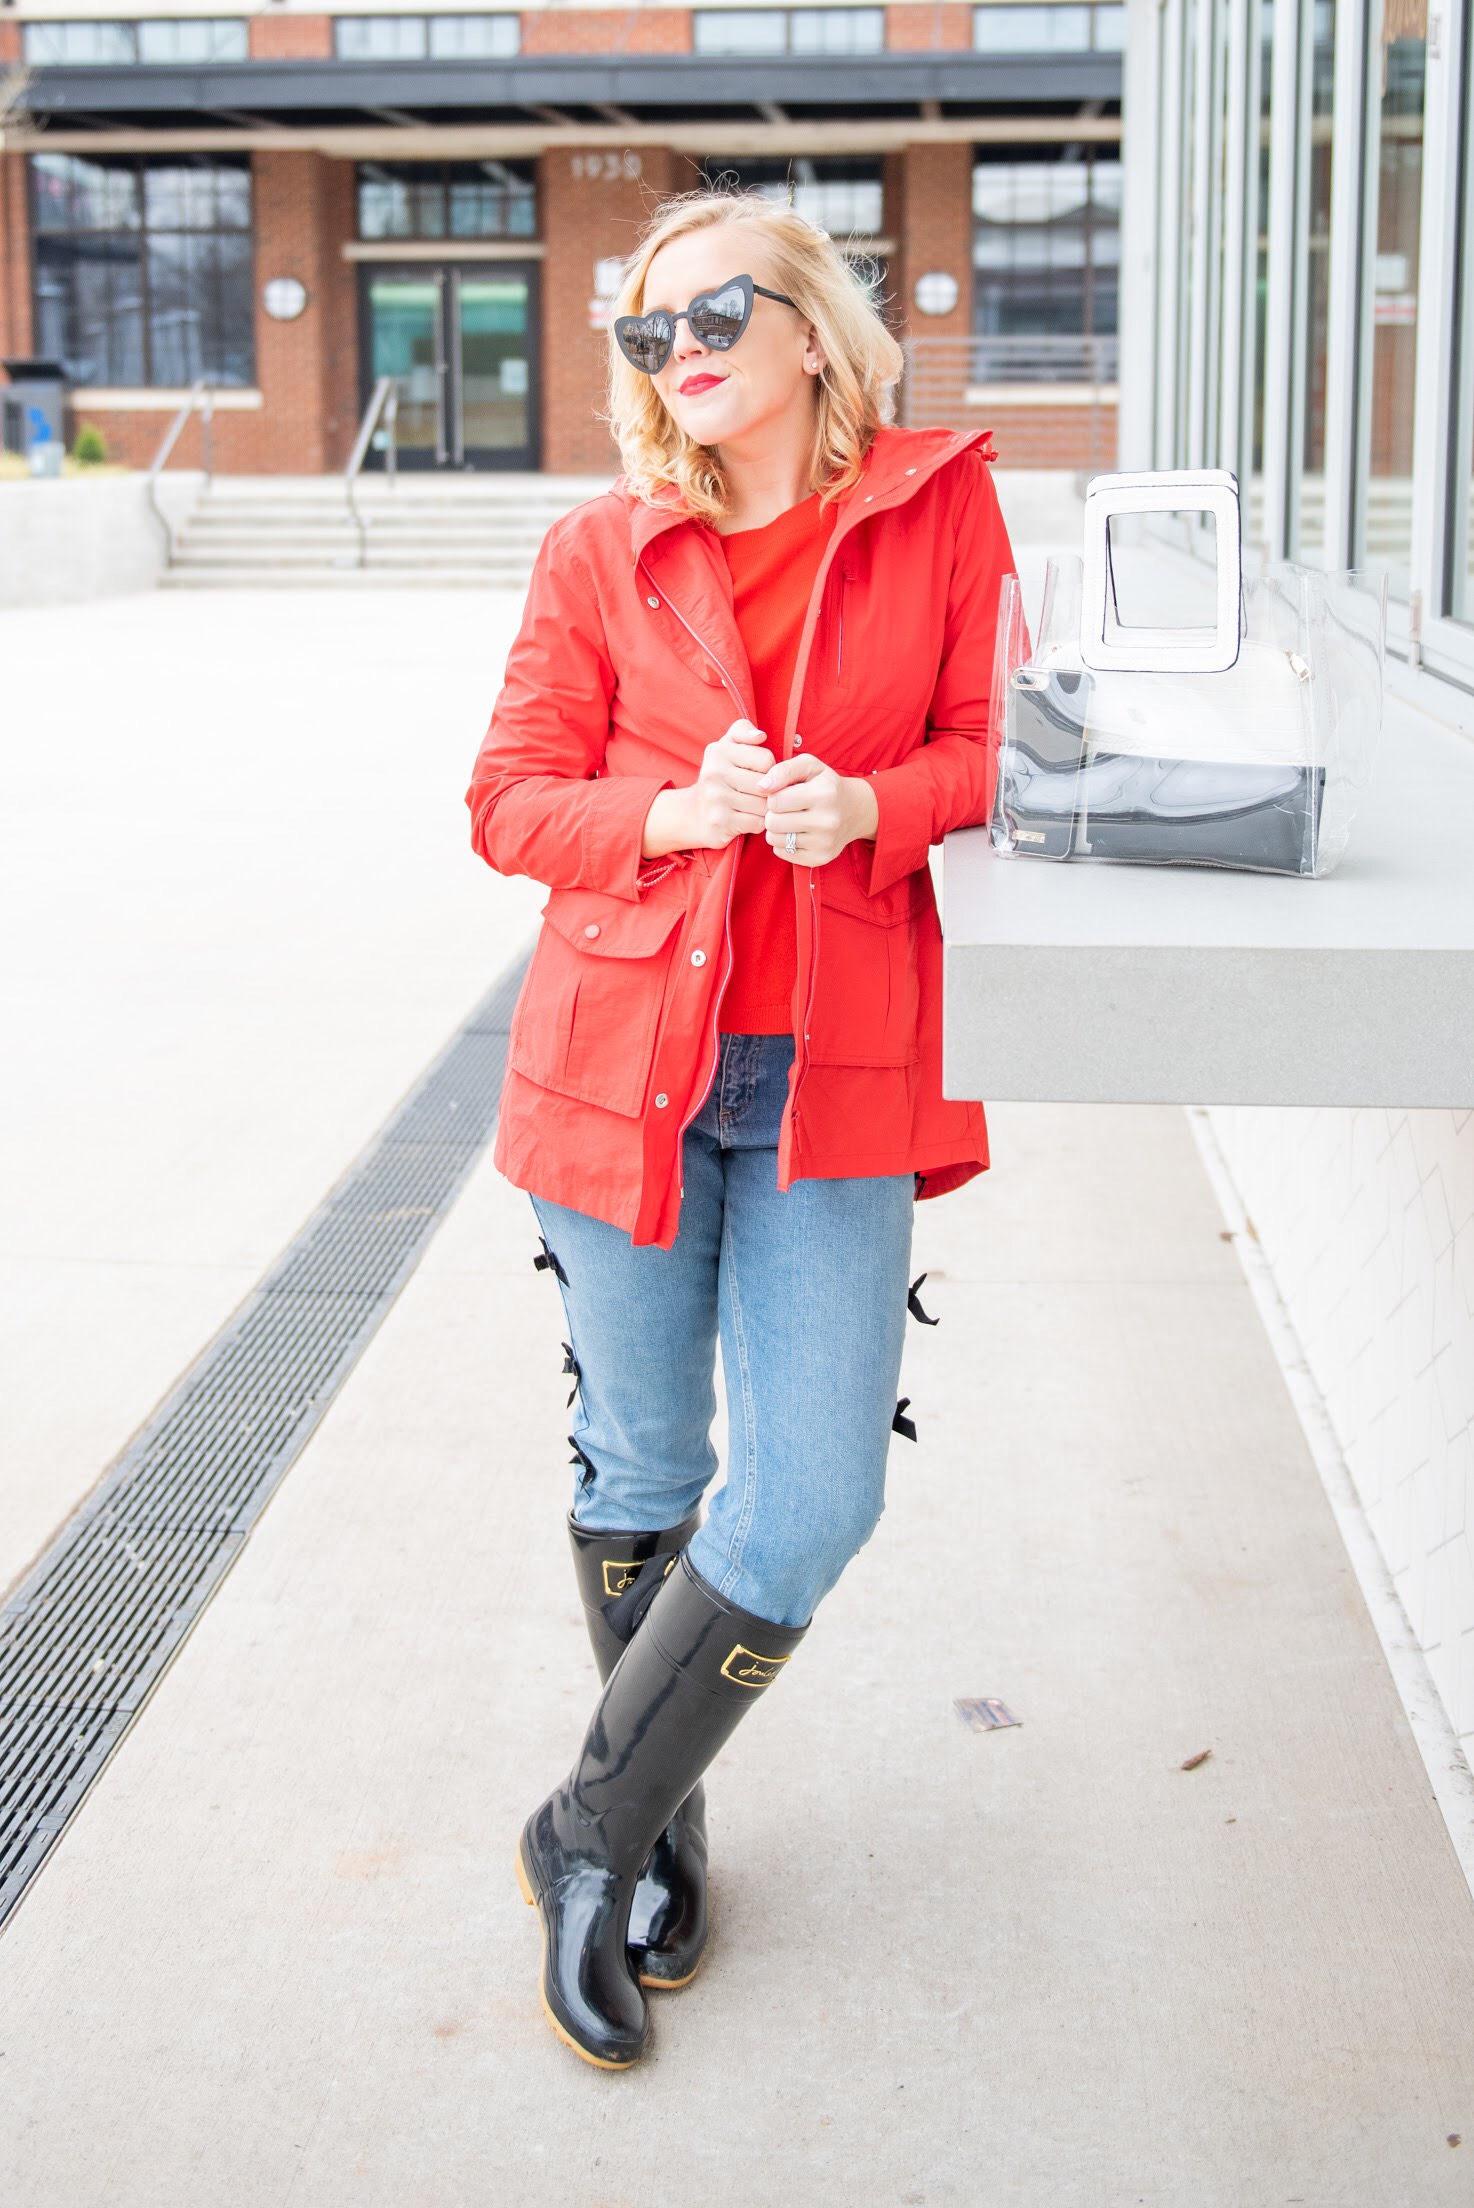 Red Rain Jacket Outfit